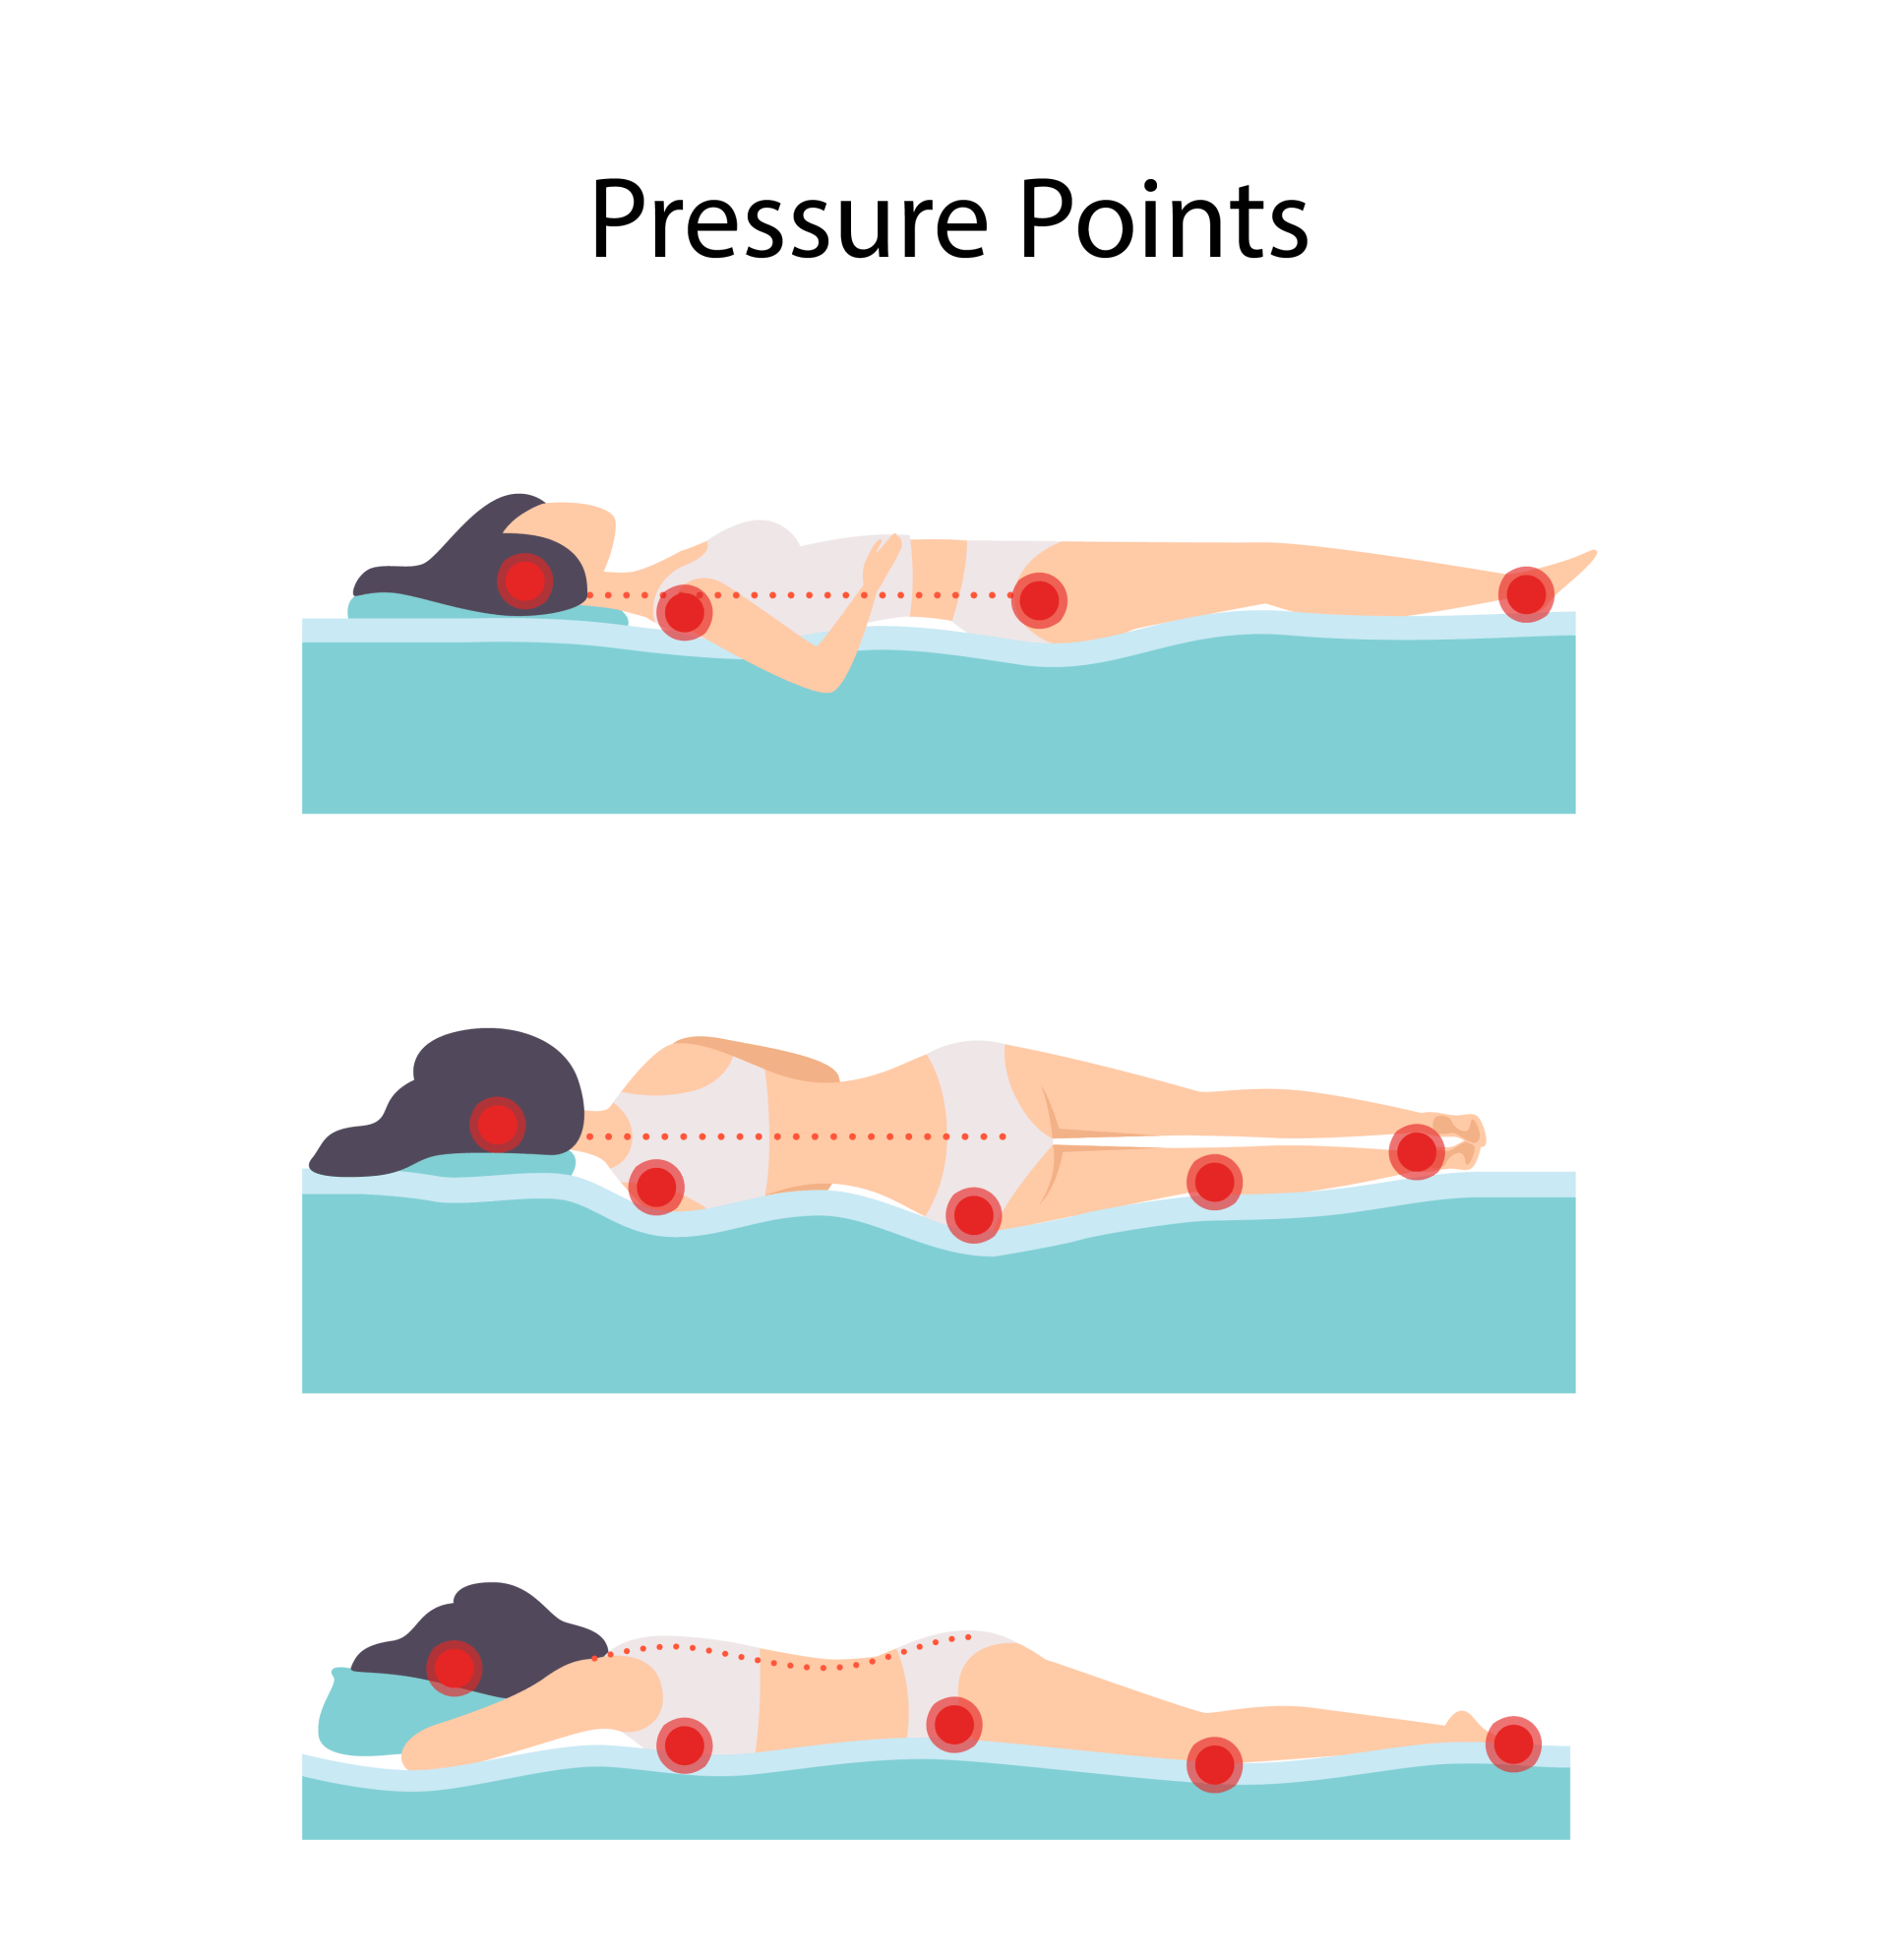 Image of pressure points on the human body